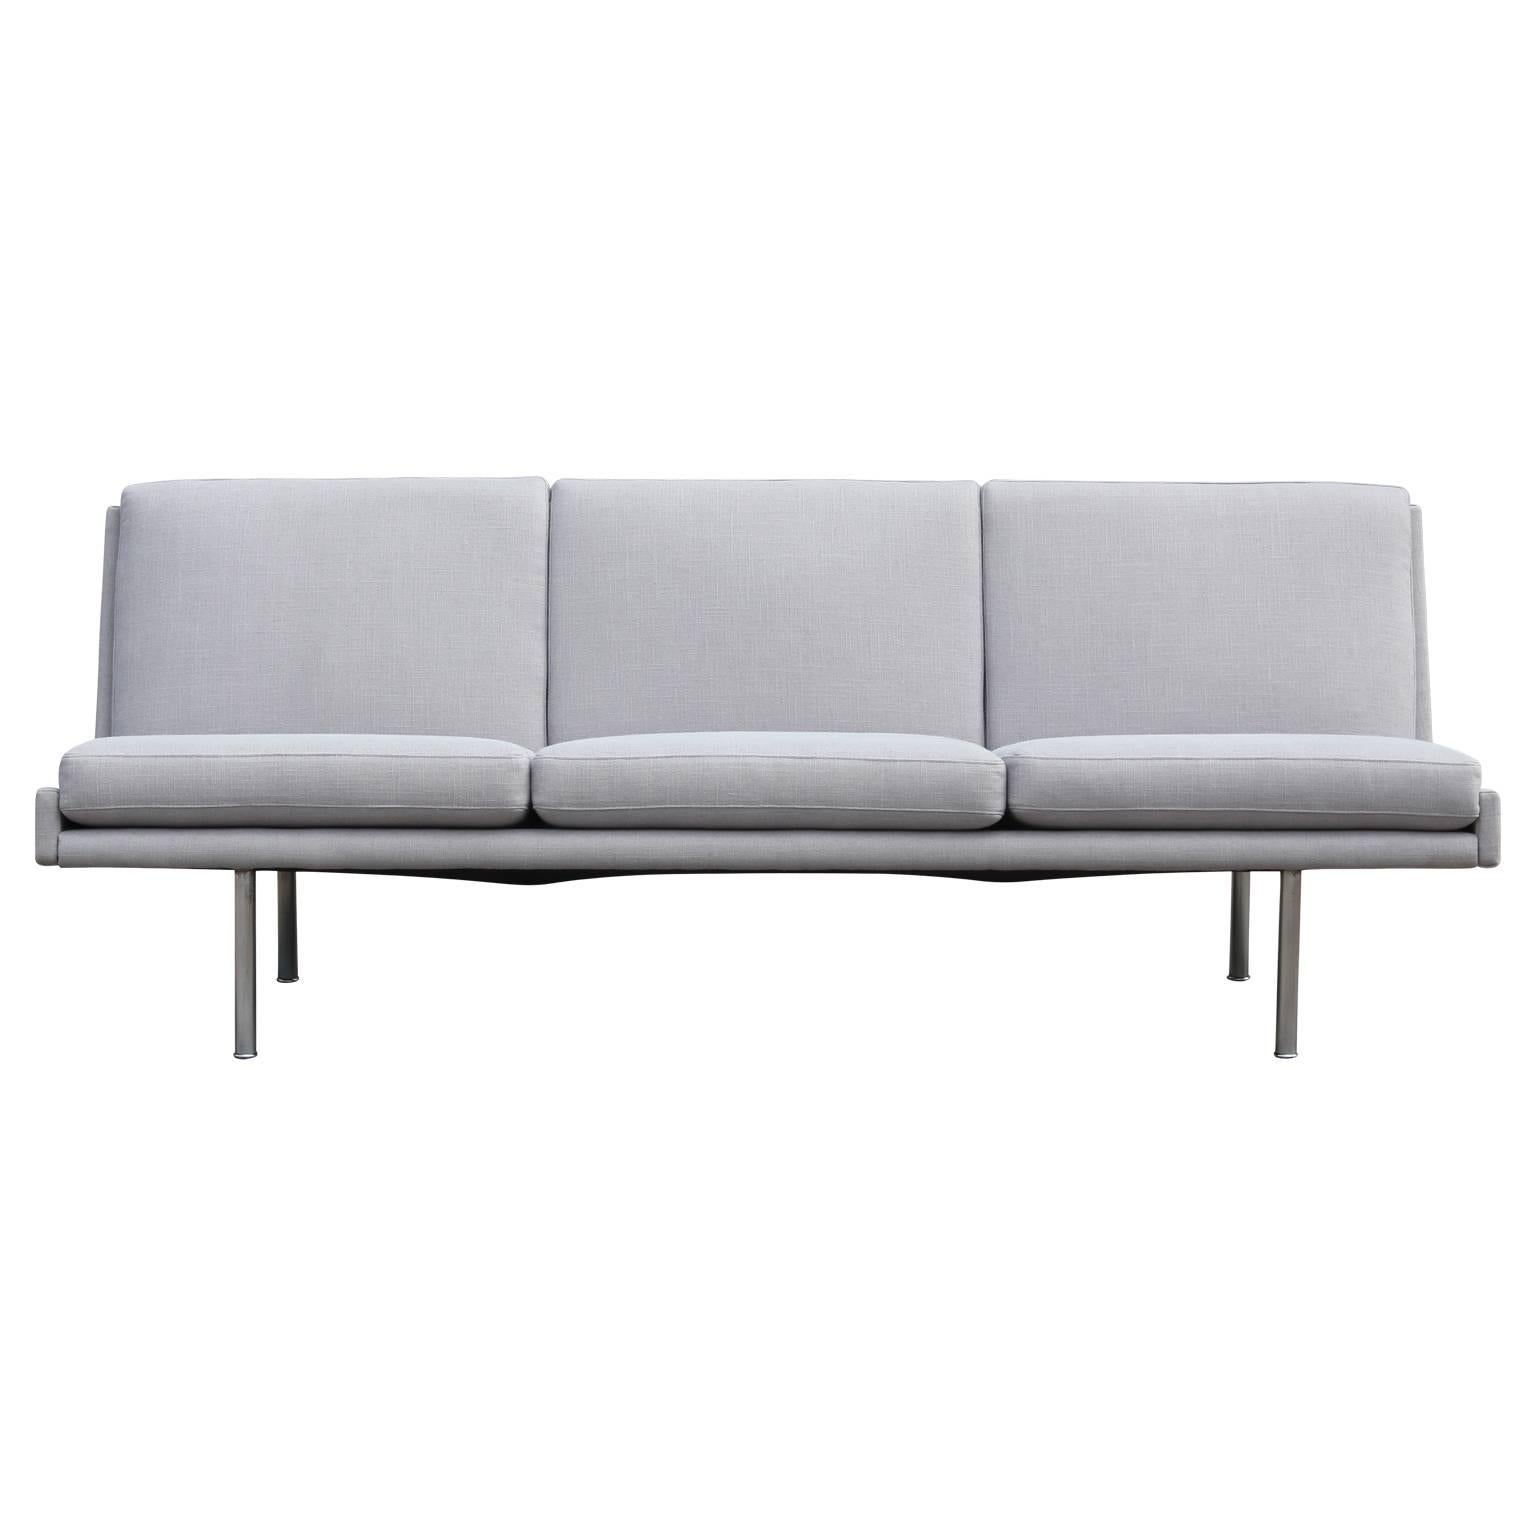 Rare and gorgeous Hans Wegner armless three-seat sofa with tubular steel legs and upholstered in a gorgeous light grey woven Crypton fabric. Very unique.